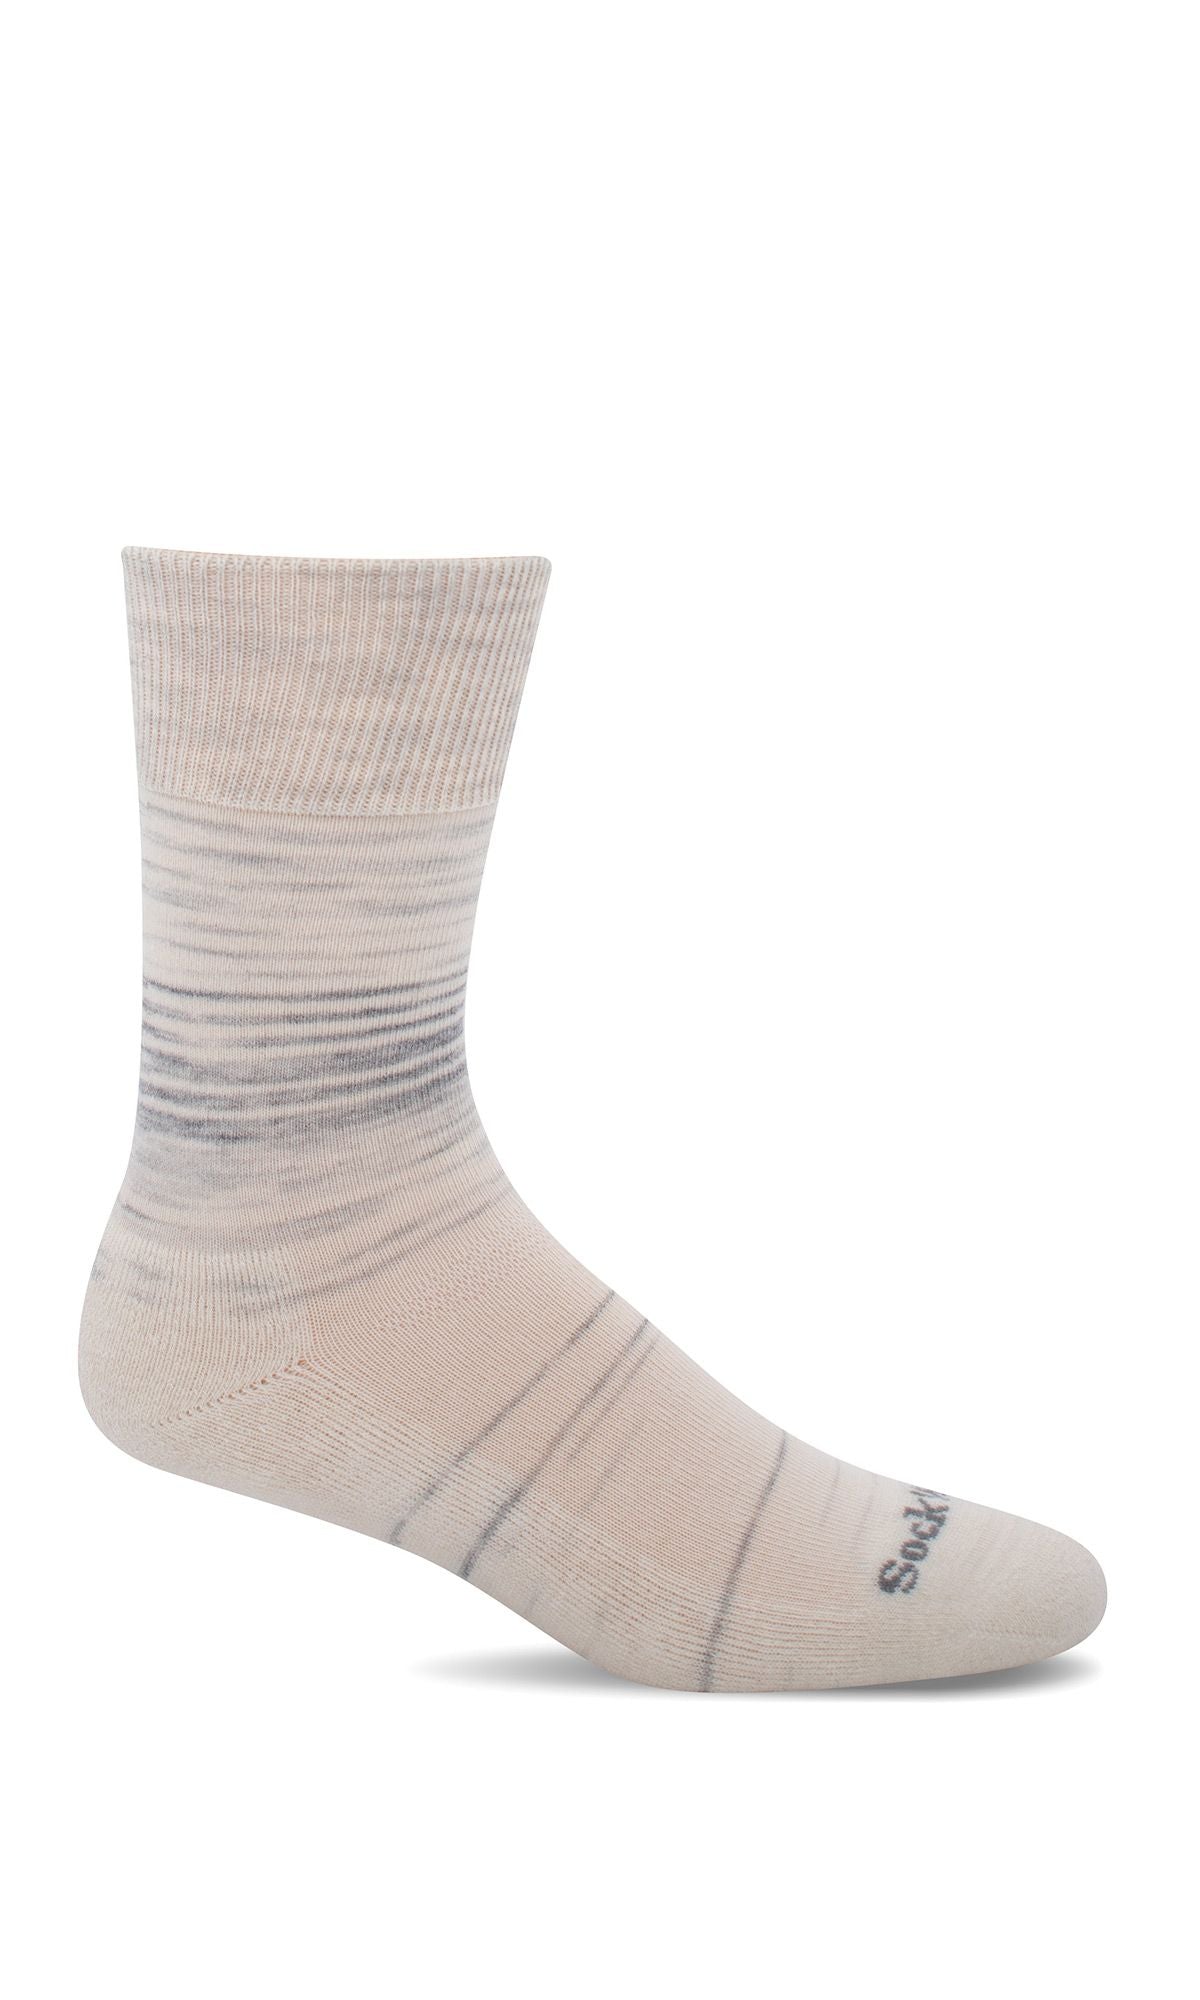 Sockwell Easy Does It Relaxed Fit Ask Socks (Women’s)